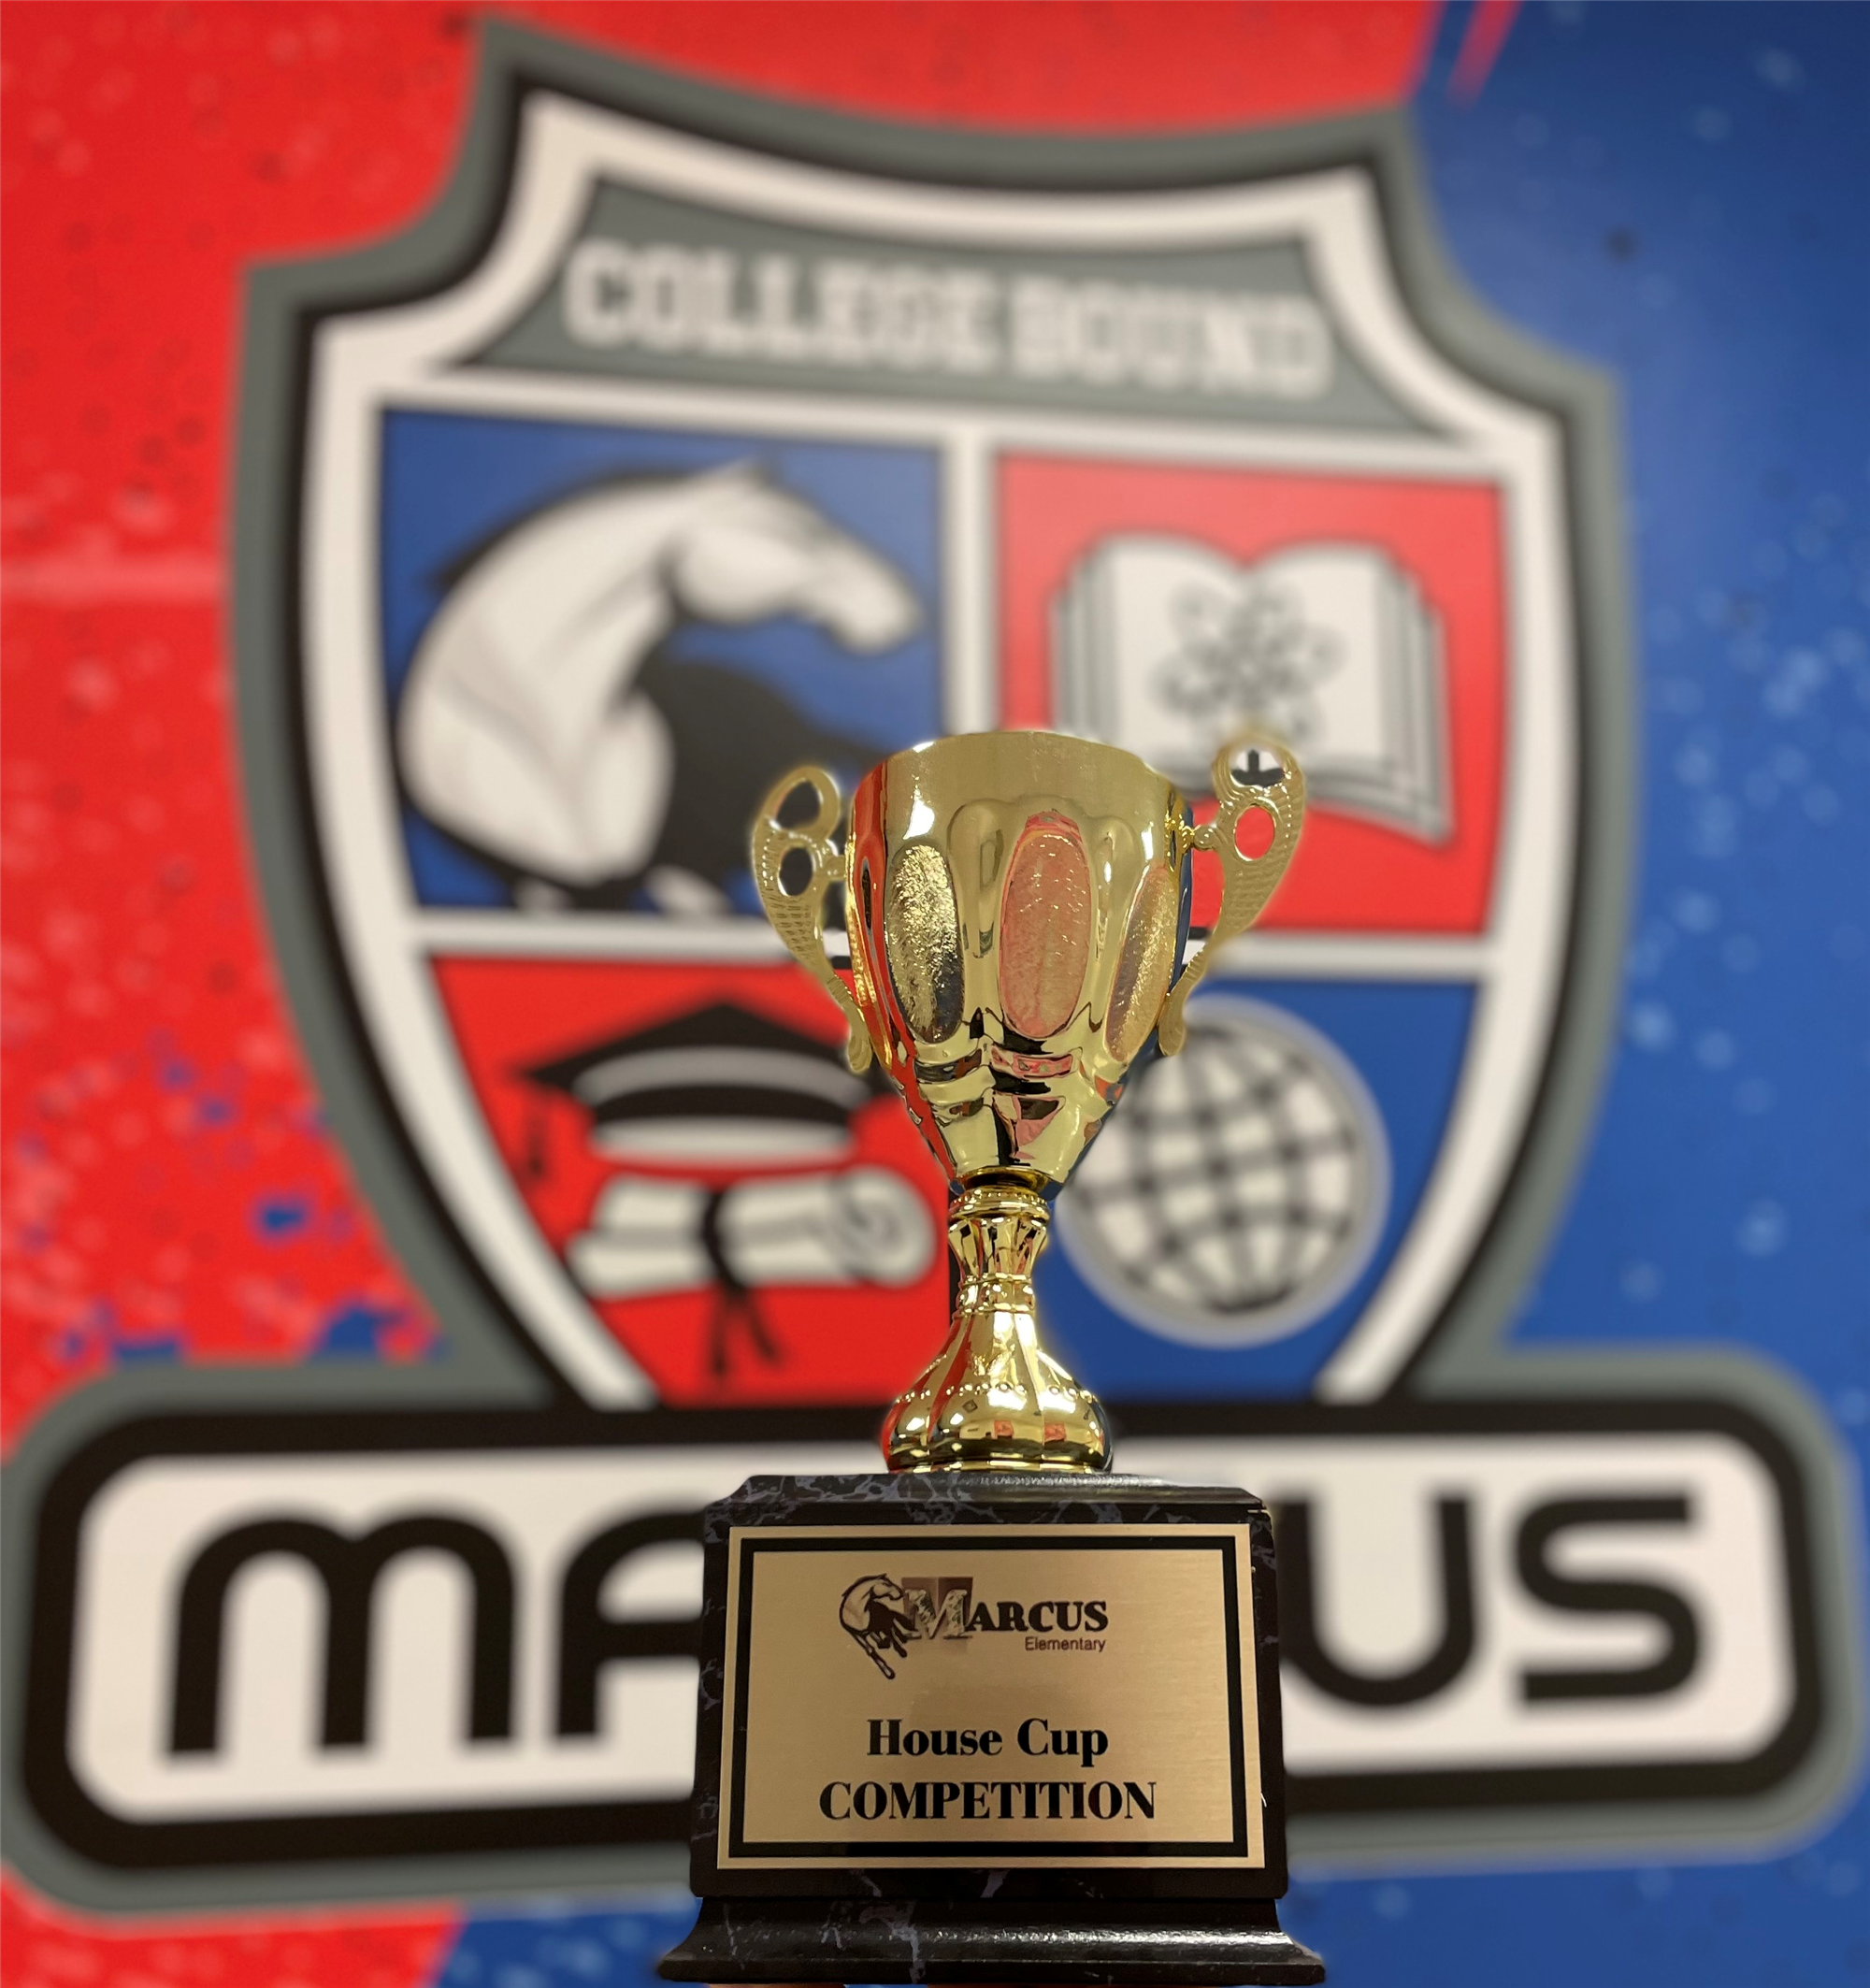 A closeup shot of the House Cup trophy with the Marcus crest in the background